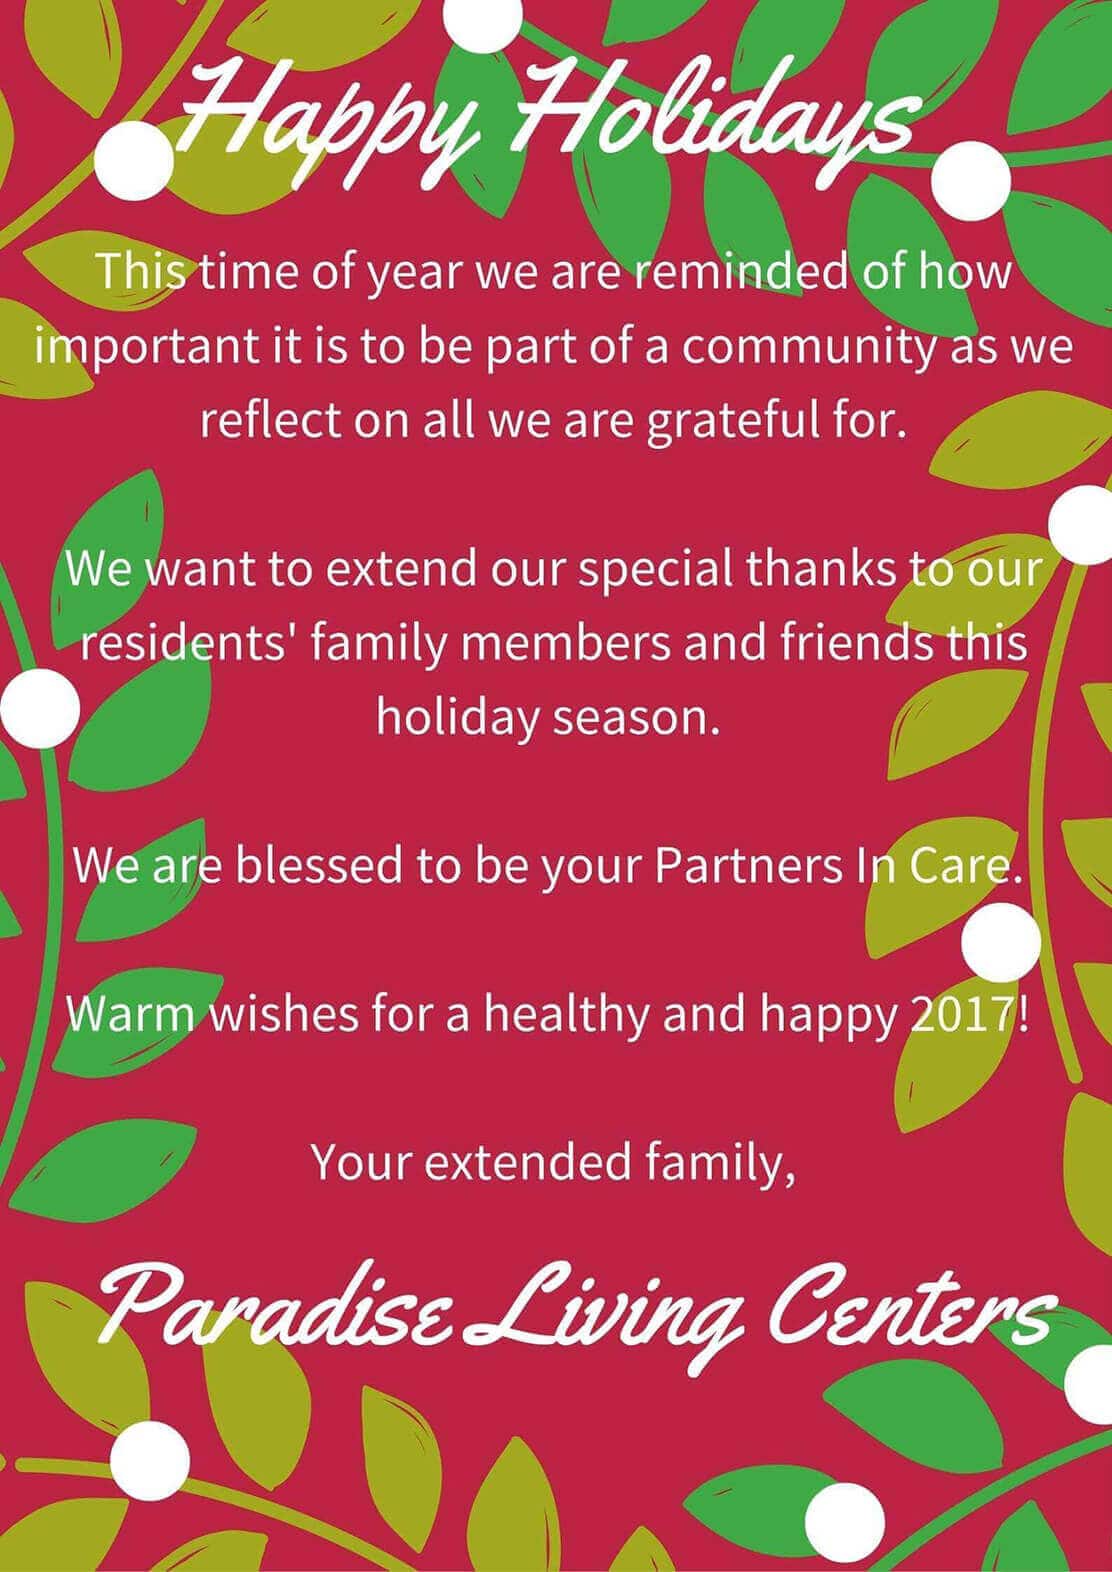 Season's Greetings from Paradise Living Centers